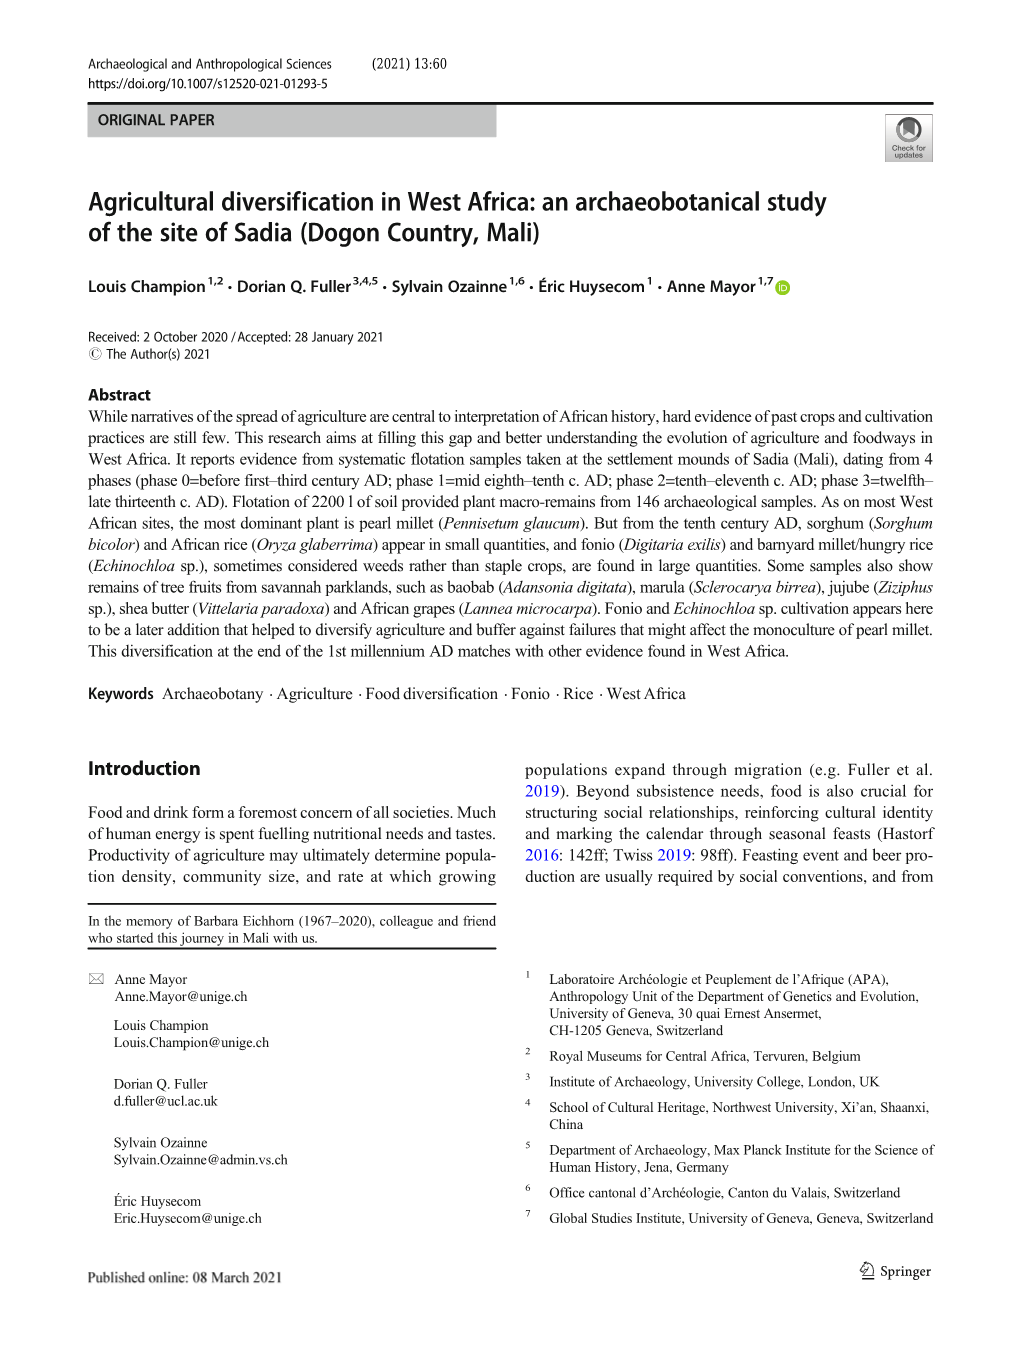 Agricultural Diversification in West Africa: an Archaeobotanical Study of the Site of Sadia (Dogon Country, Mali)